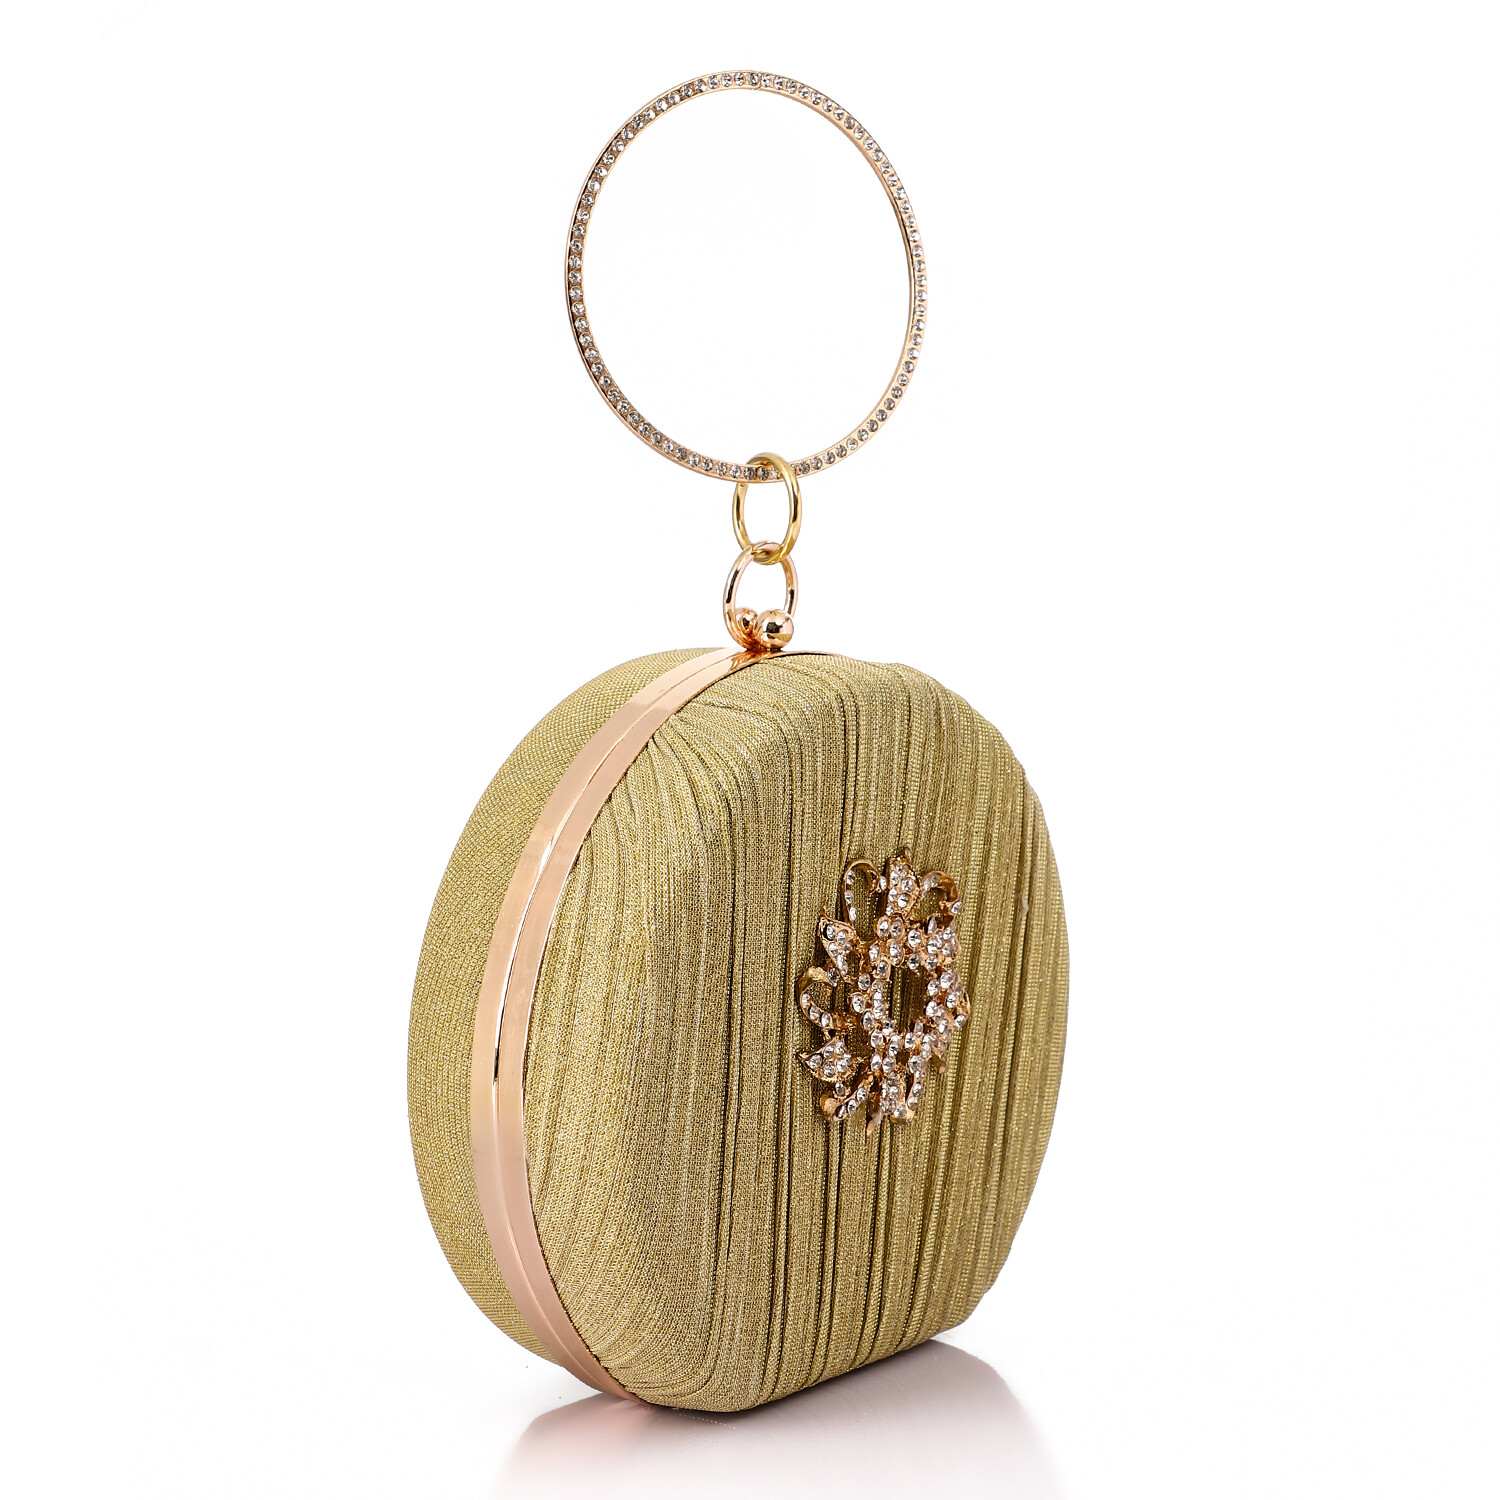 Oval Shaped Gittery Clutch with Decorative Front Flower - Gold-4938